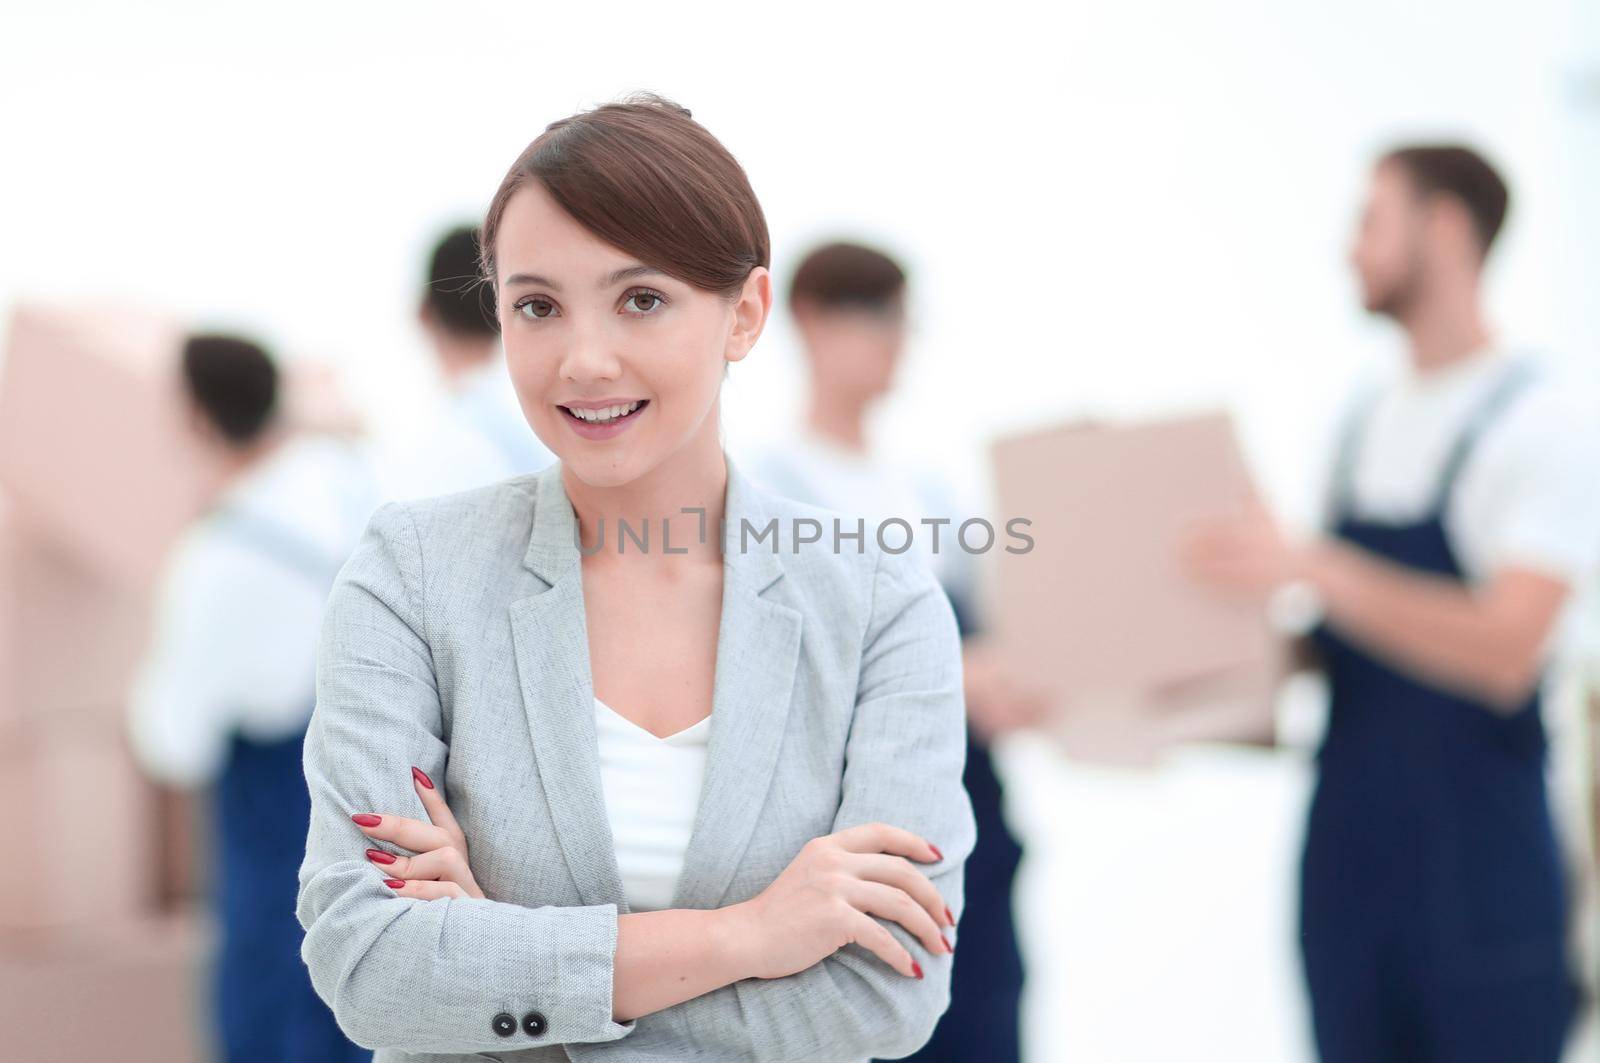 Smiling manager holding clipboard on blurred background with movers and boxes.